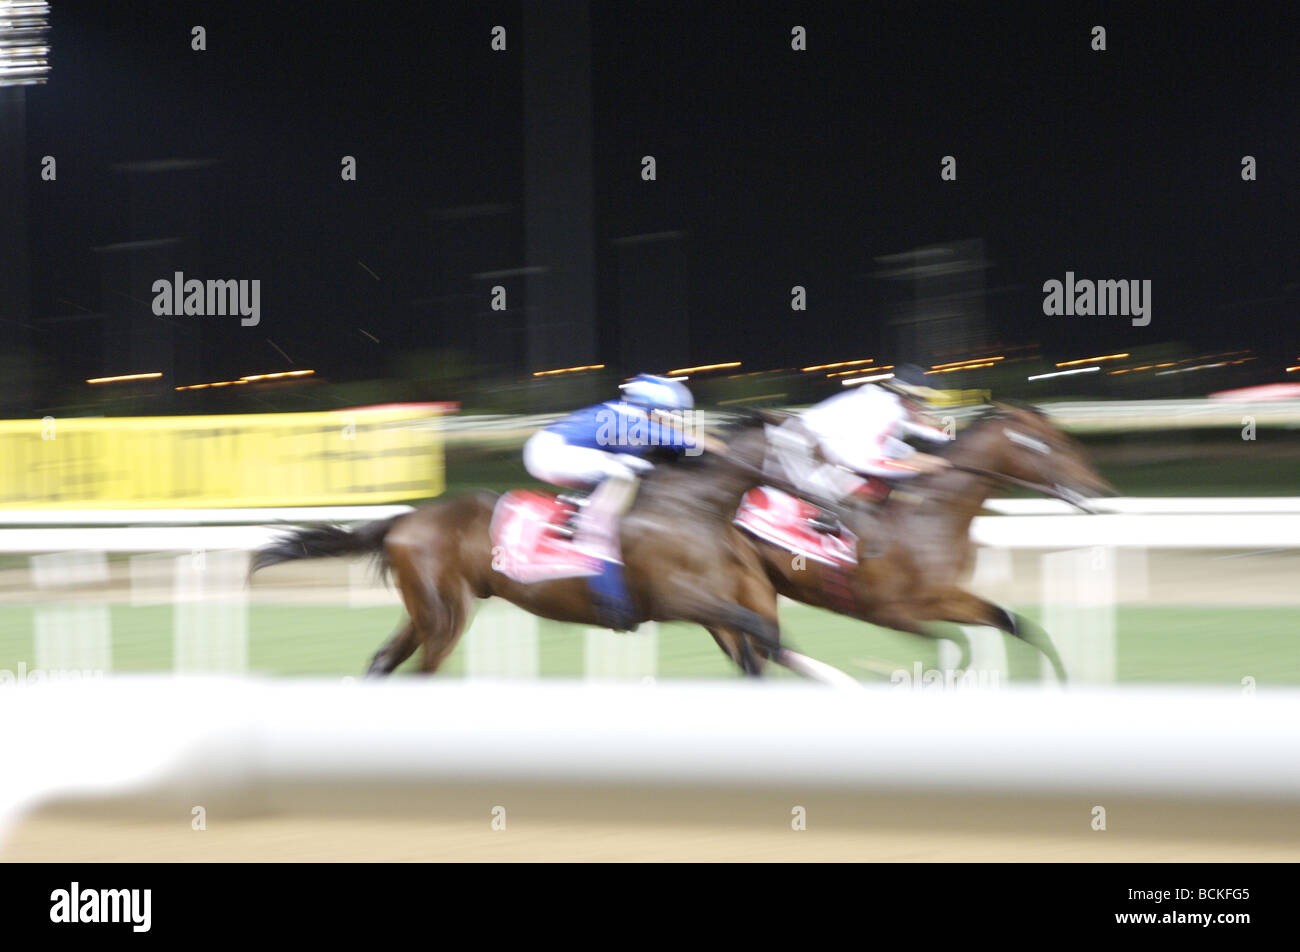 Blurred images of racehorses racing Stock Photo